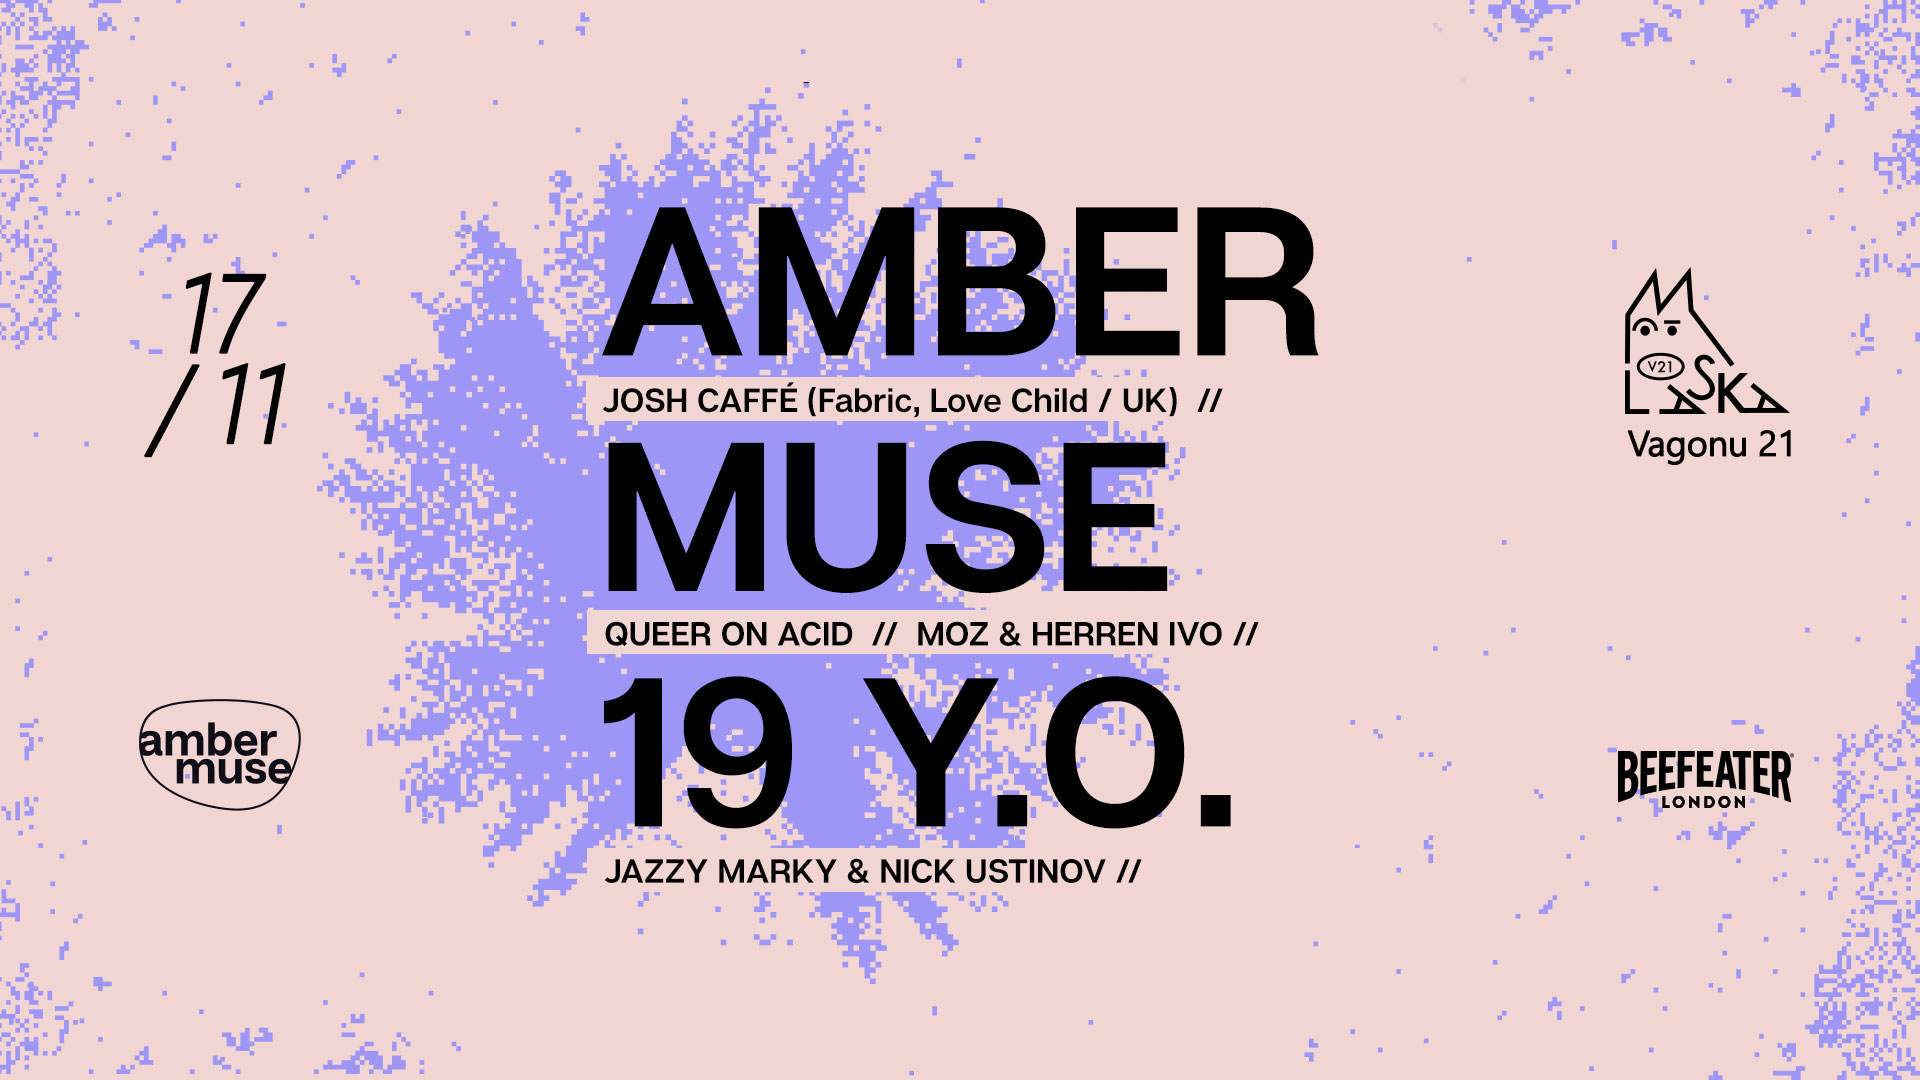 Amber Muse's 19th anniversary with Josh Caffé (UK) - フライヤー表